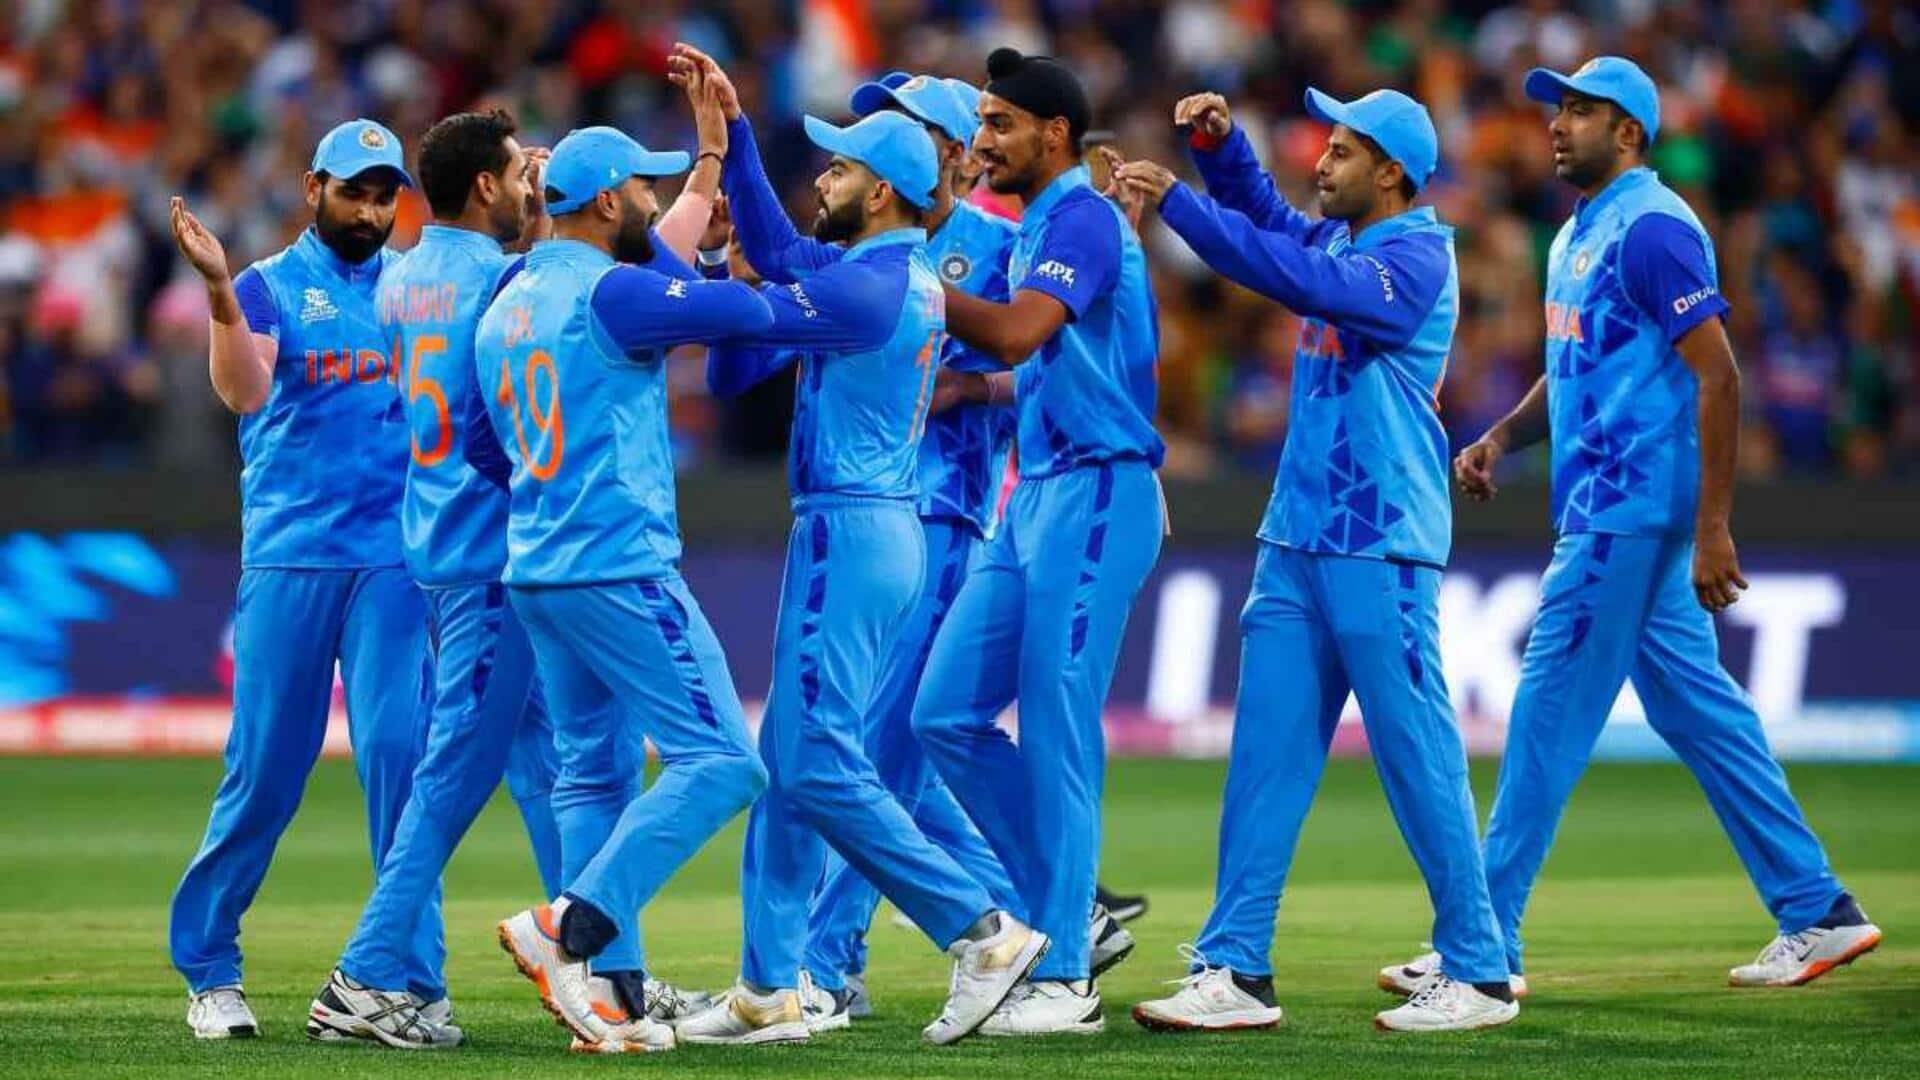 Presenting lowest totals against India in T20 World Cup